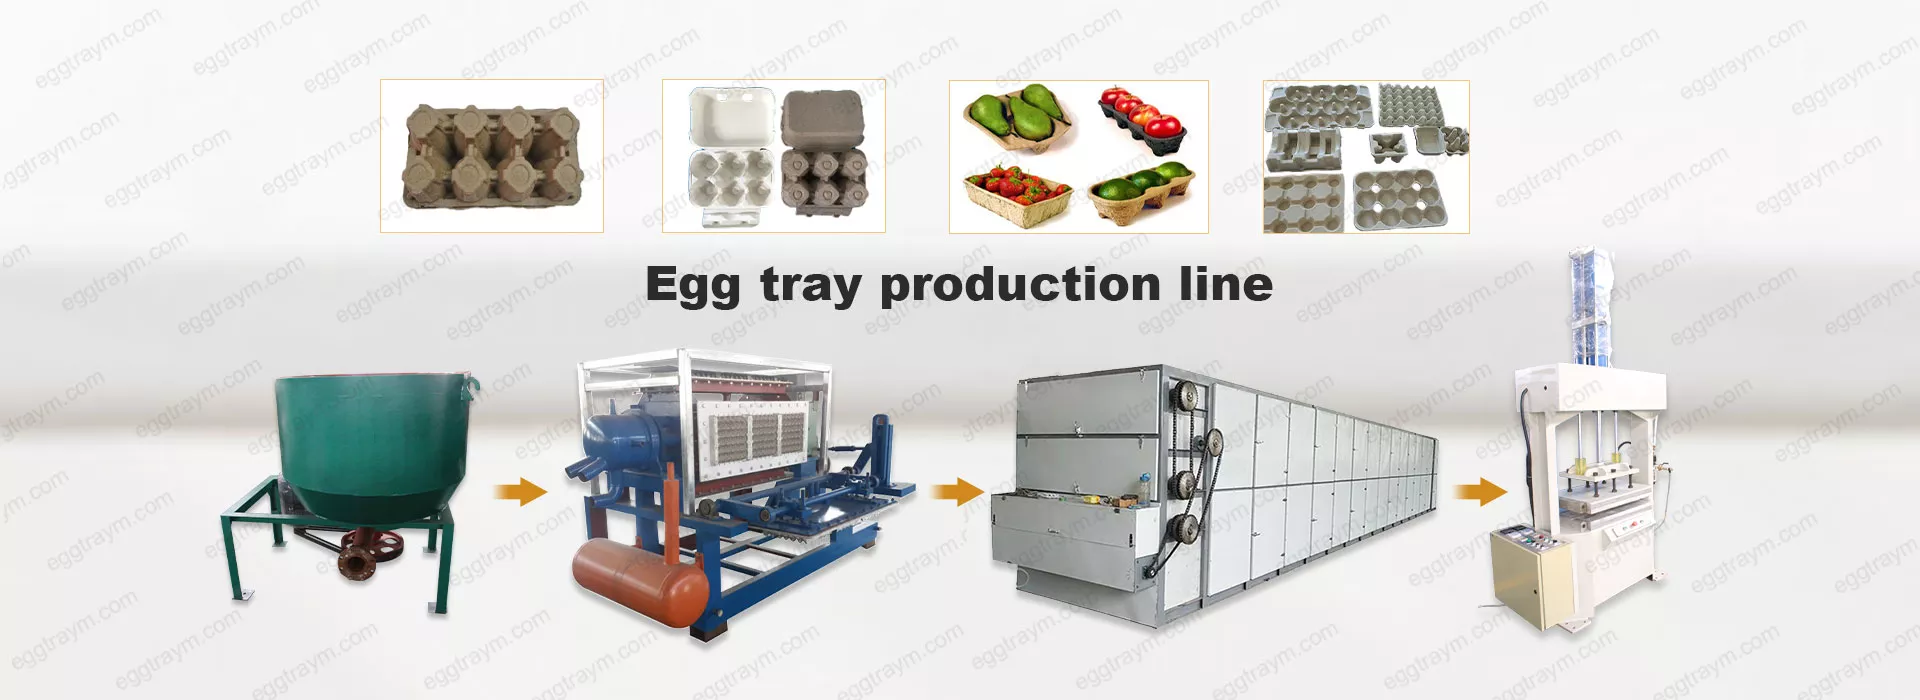 egg tray production line1